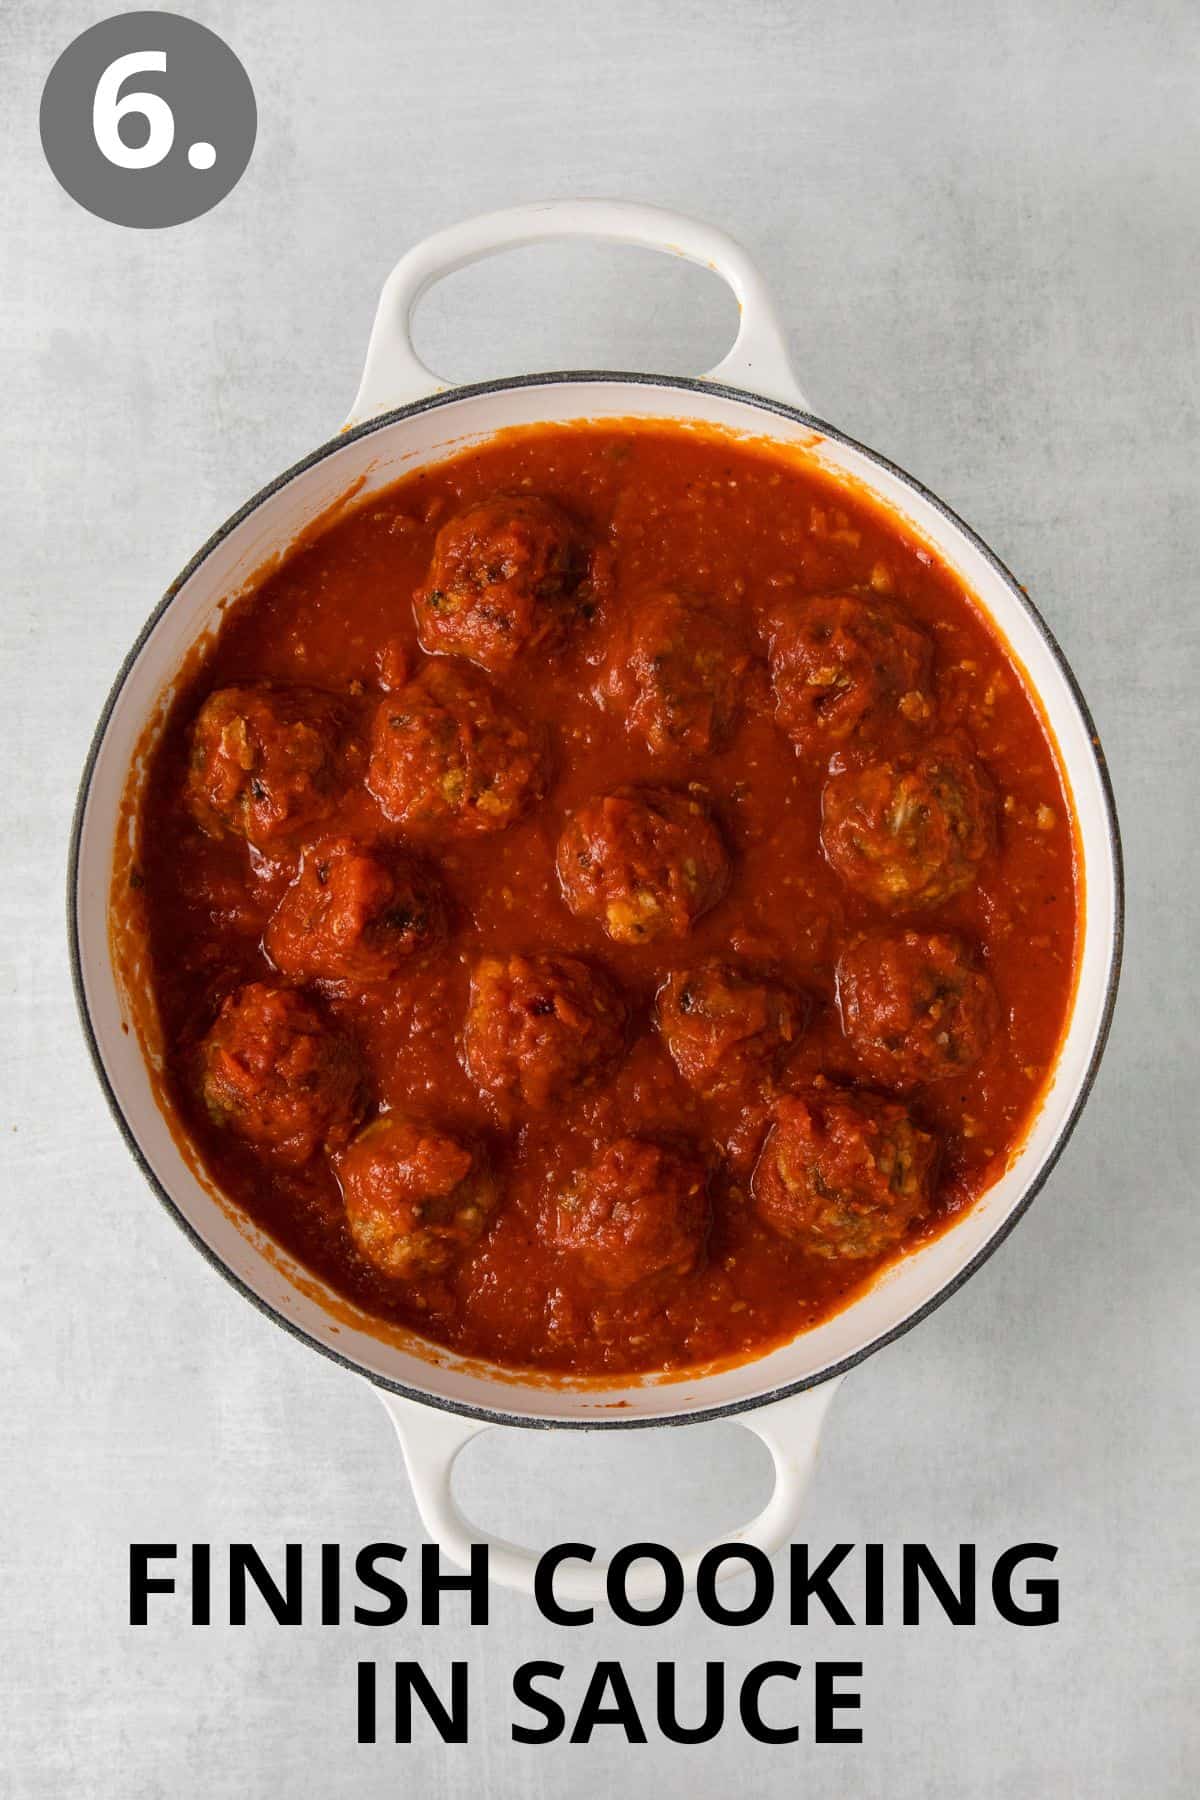 Meatballs cooking in a pot with sauce